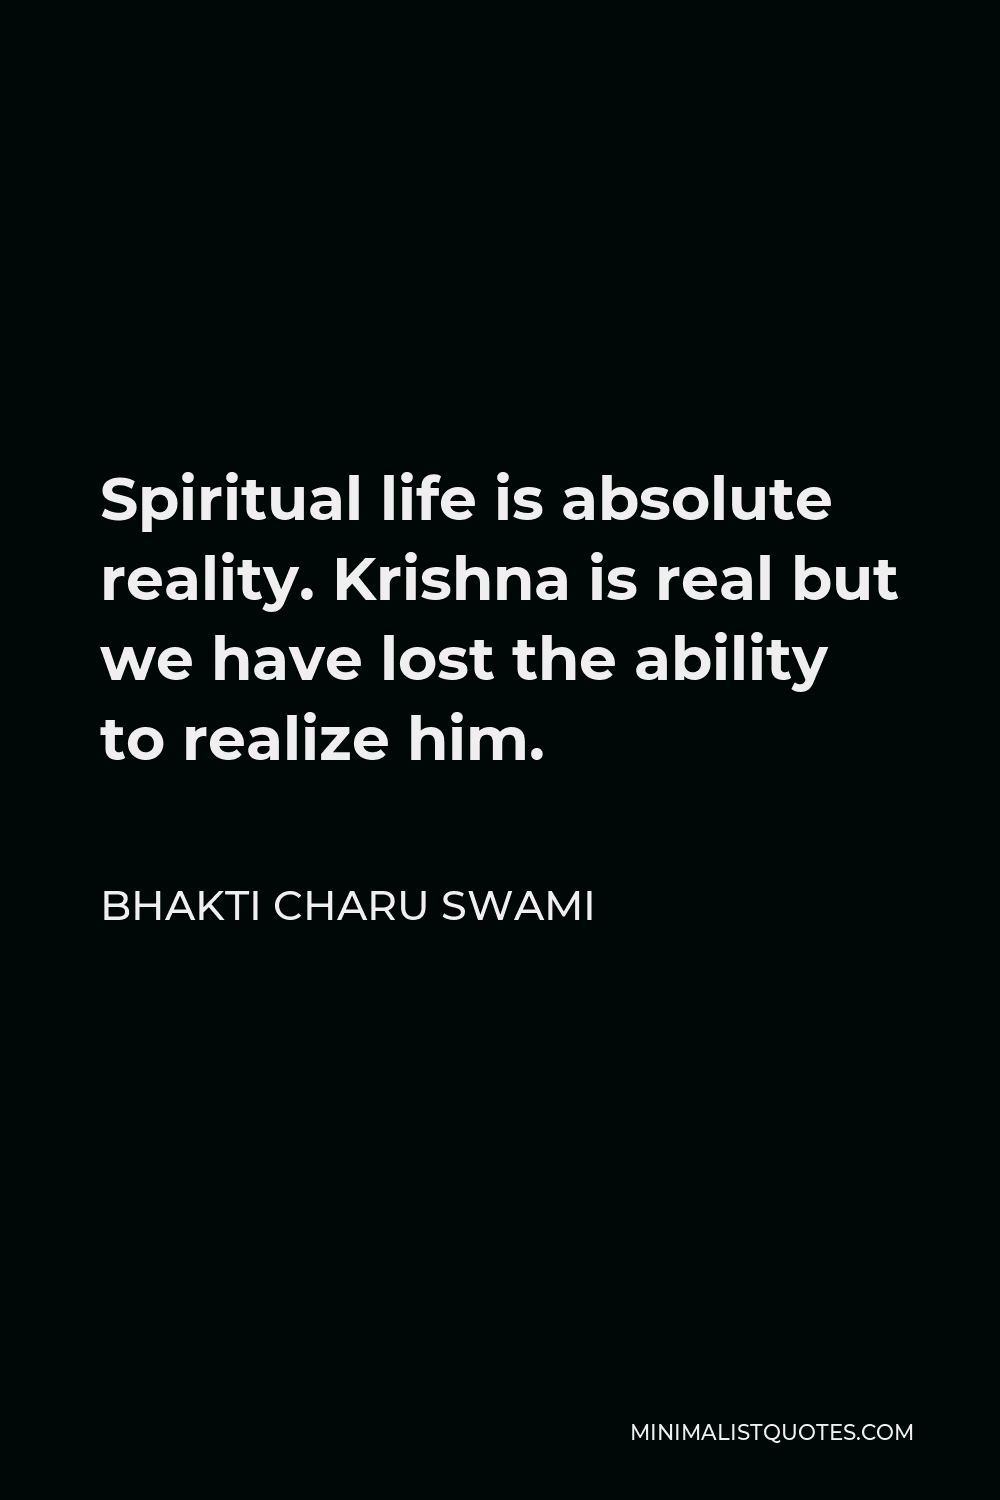 Bhakti Charu Swami Quote - Spiritual life is absolute reality. Krishna is real but we have lost the ability to realize him.